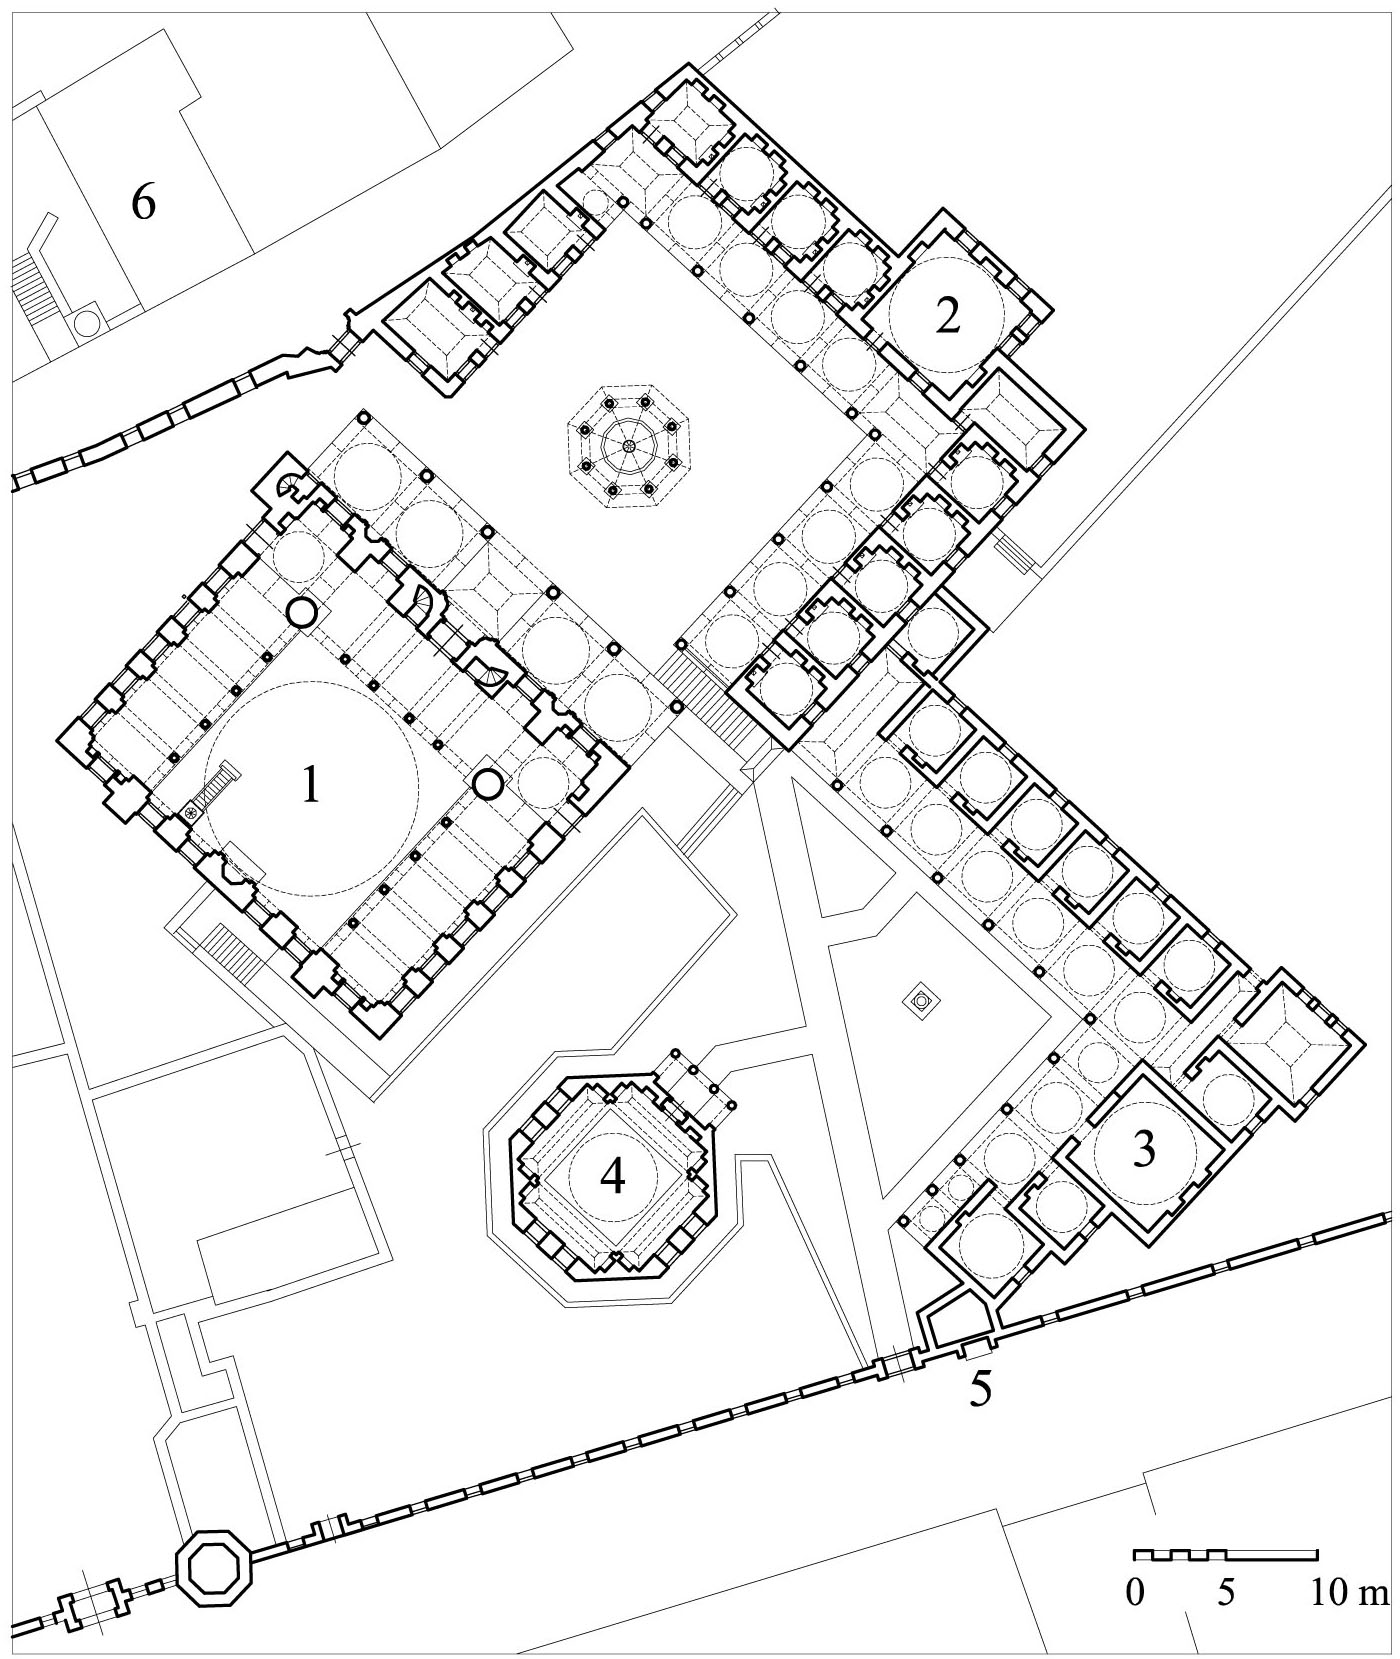 Floor plan of complex showing (1) mosque, (2) madrasa of Sah Sultan, (3) madrasa of Zal Pasa, (4) mausoleum, (5) dated public fountain, (6) pre-existing masjid of Silahi Mehmed Bey